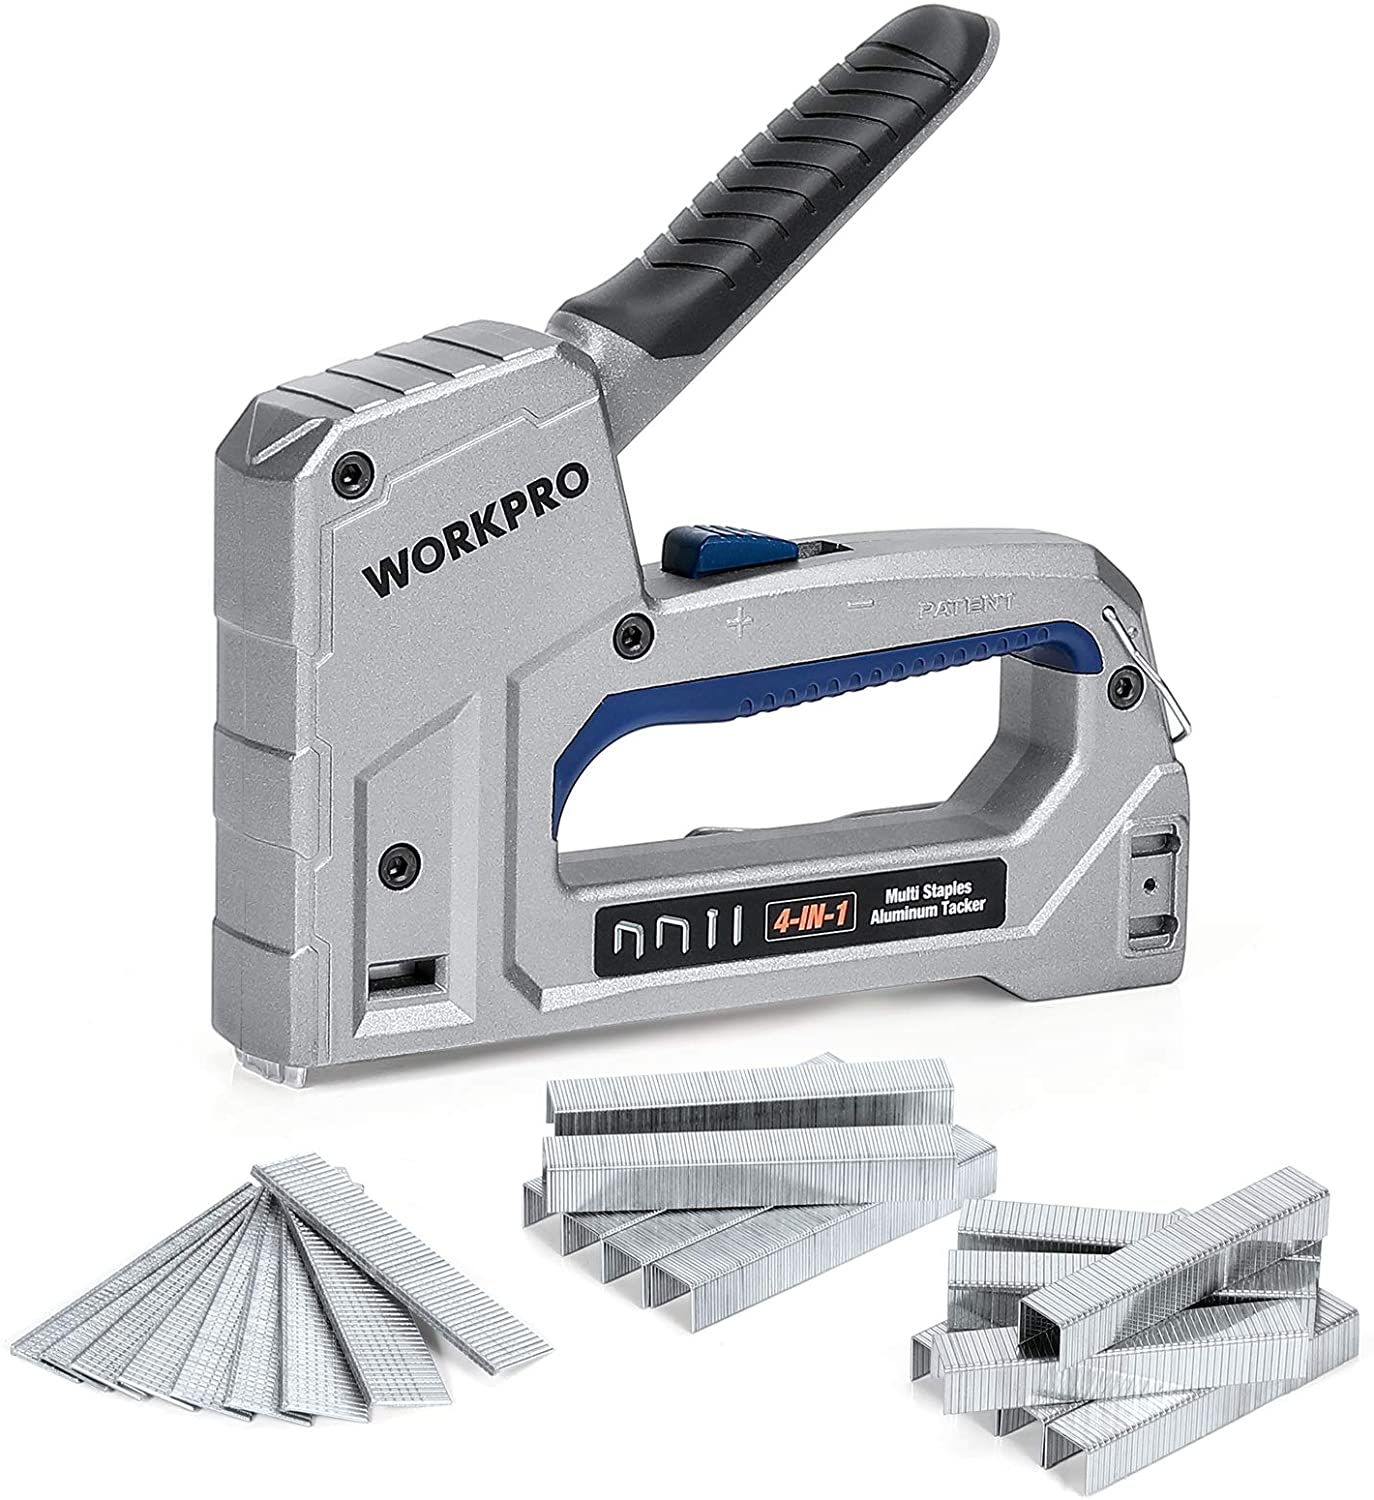 WORKPRO 6 in 1 Cordless Staple Gun, 3.6V Rechargeable Electric